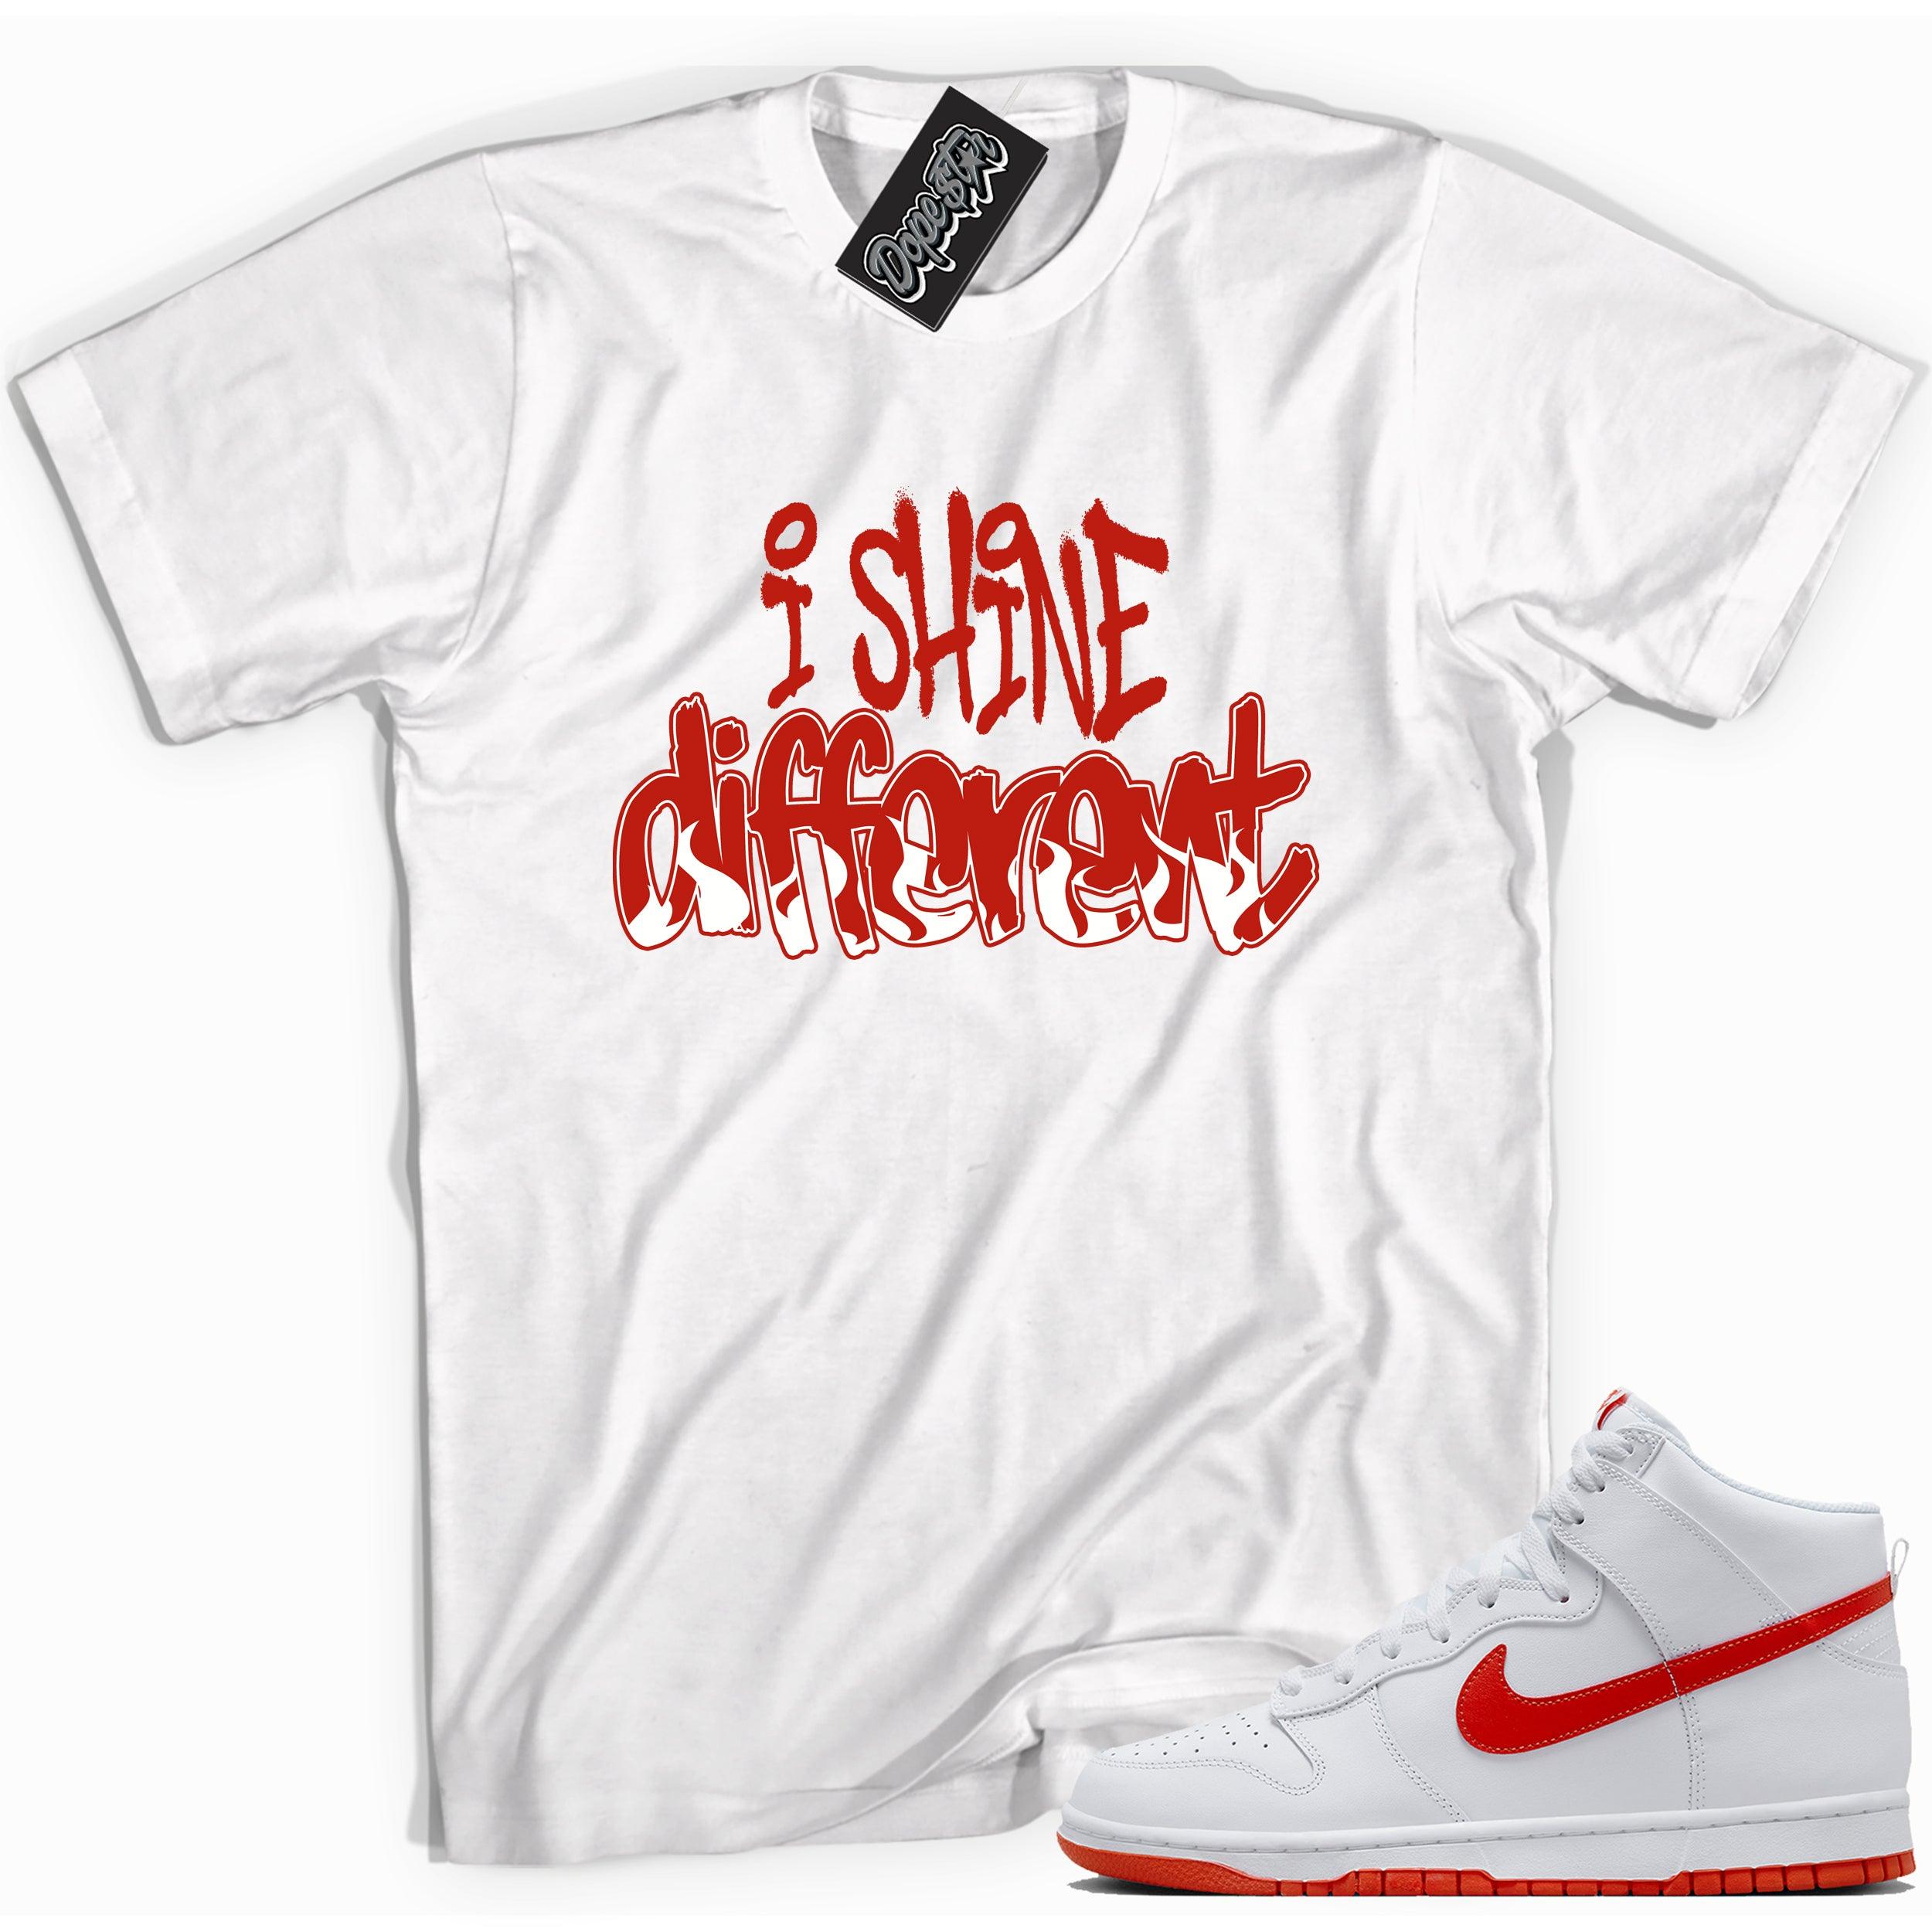 Cool white  graphic tee with 'i shine different' print, that perfectly matches Nike Dunk High White Picante Red sneakers.